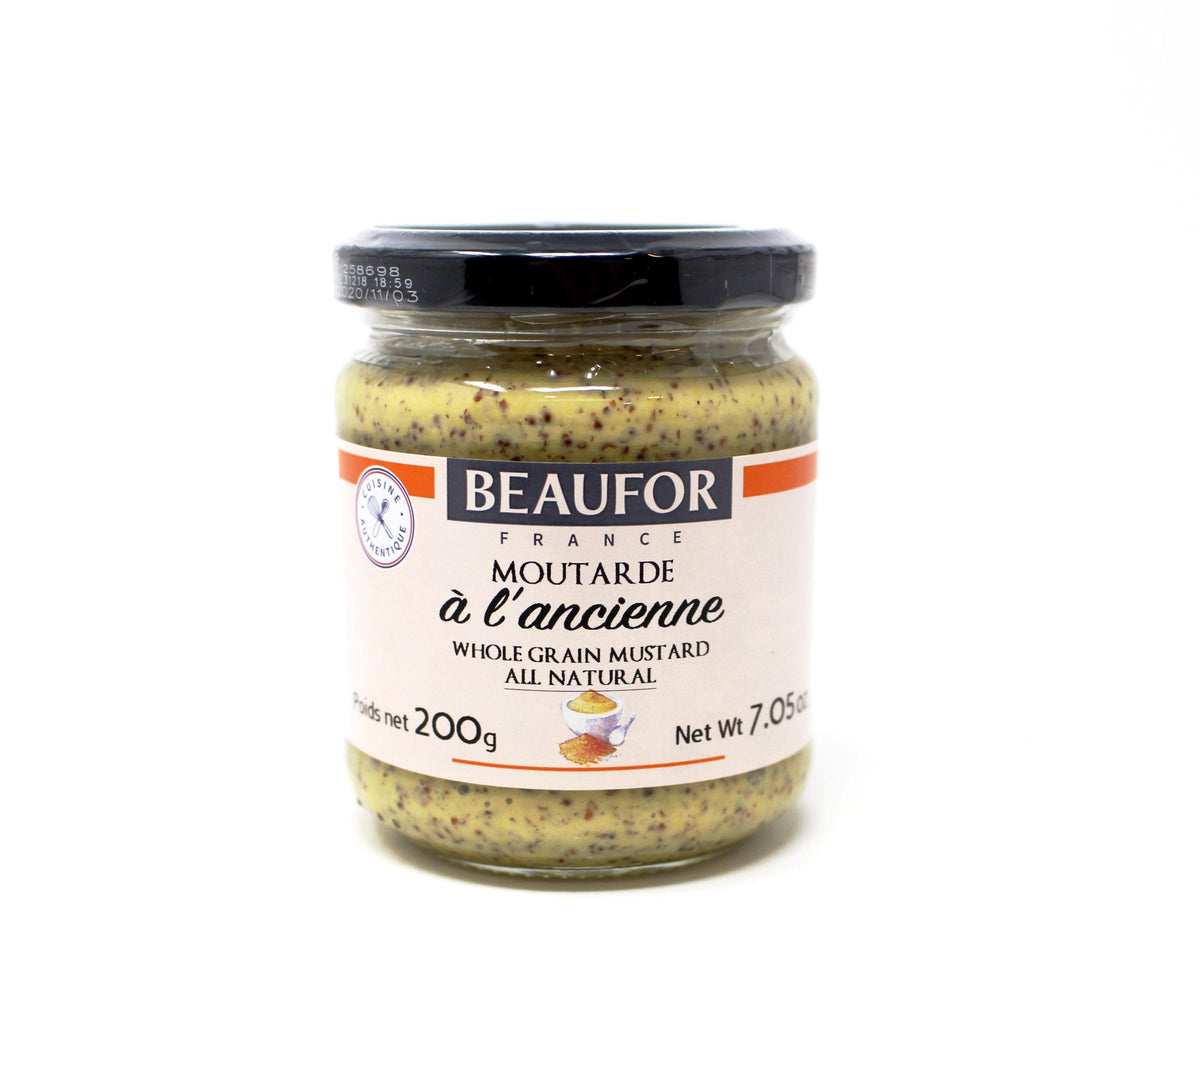 Beaufor Whole Grain Mustard, 7 oz - Cured and Cultivated